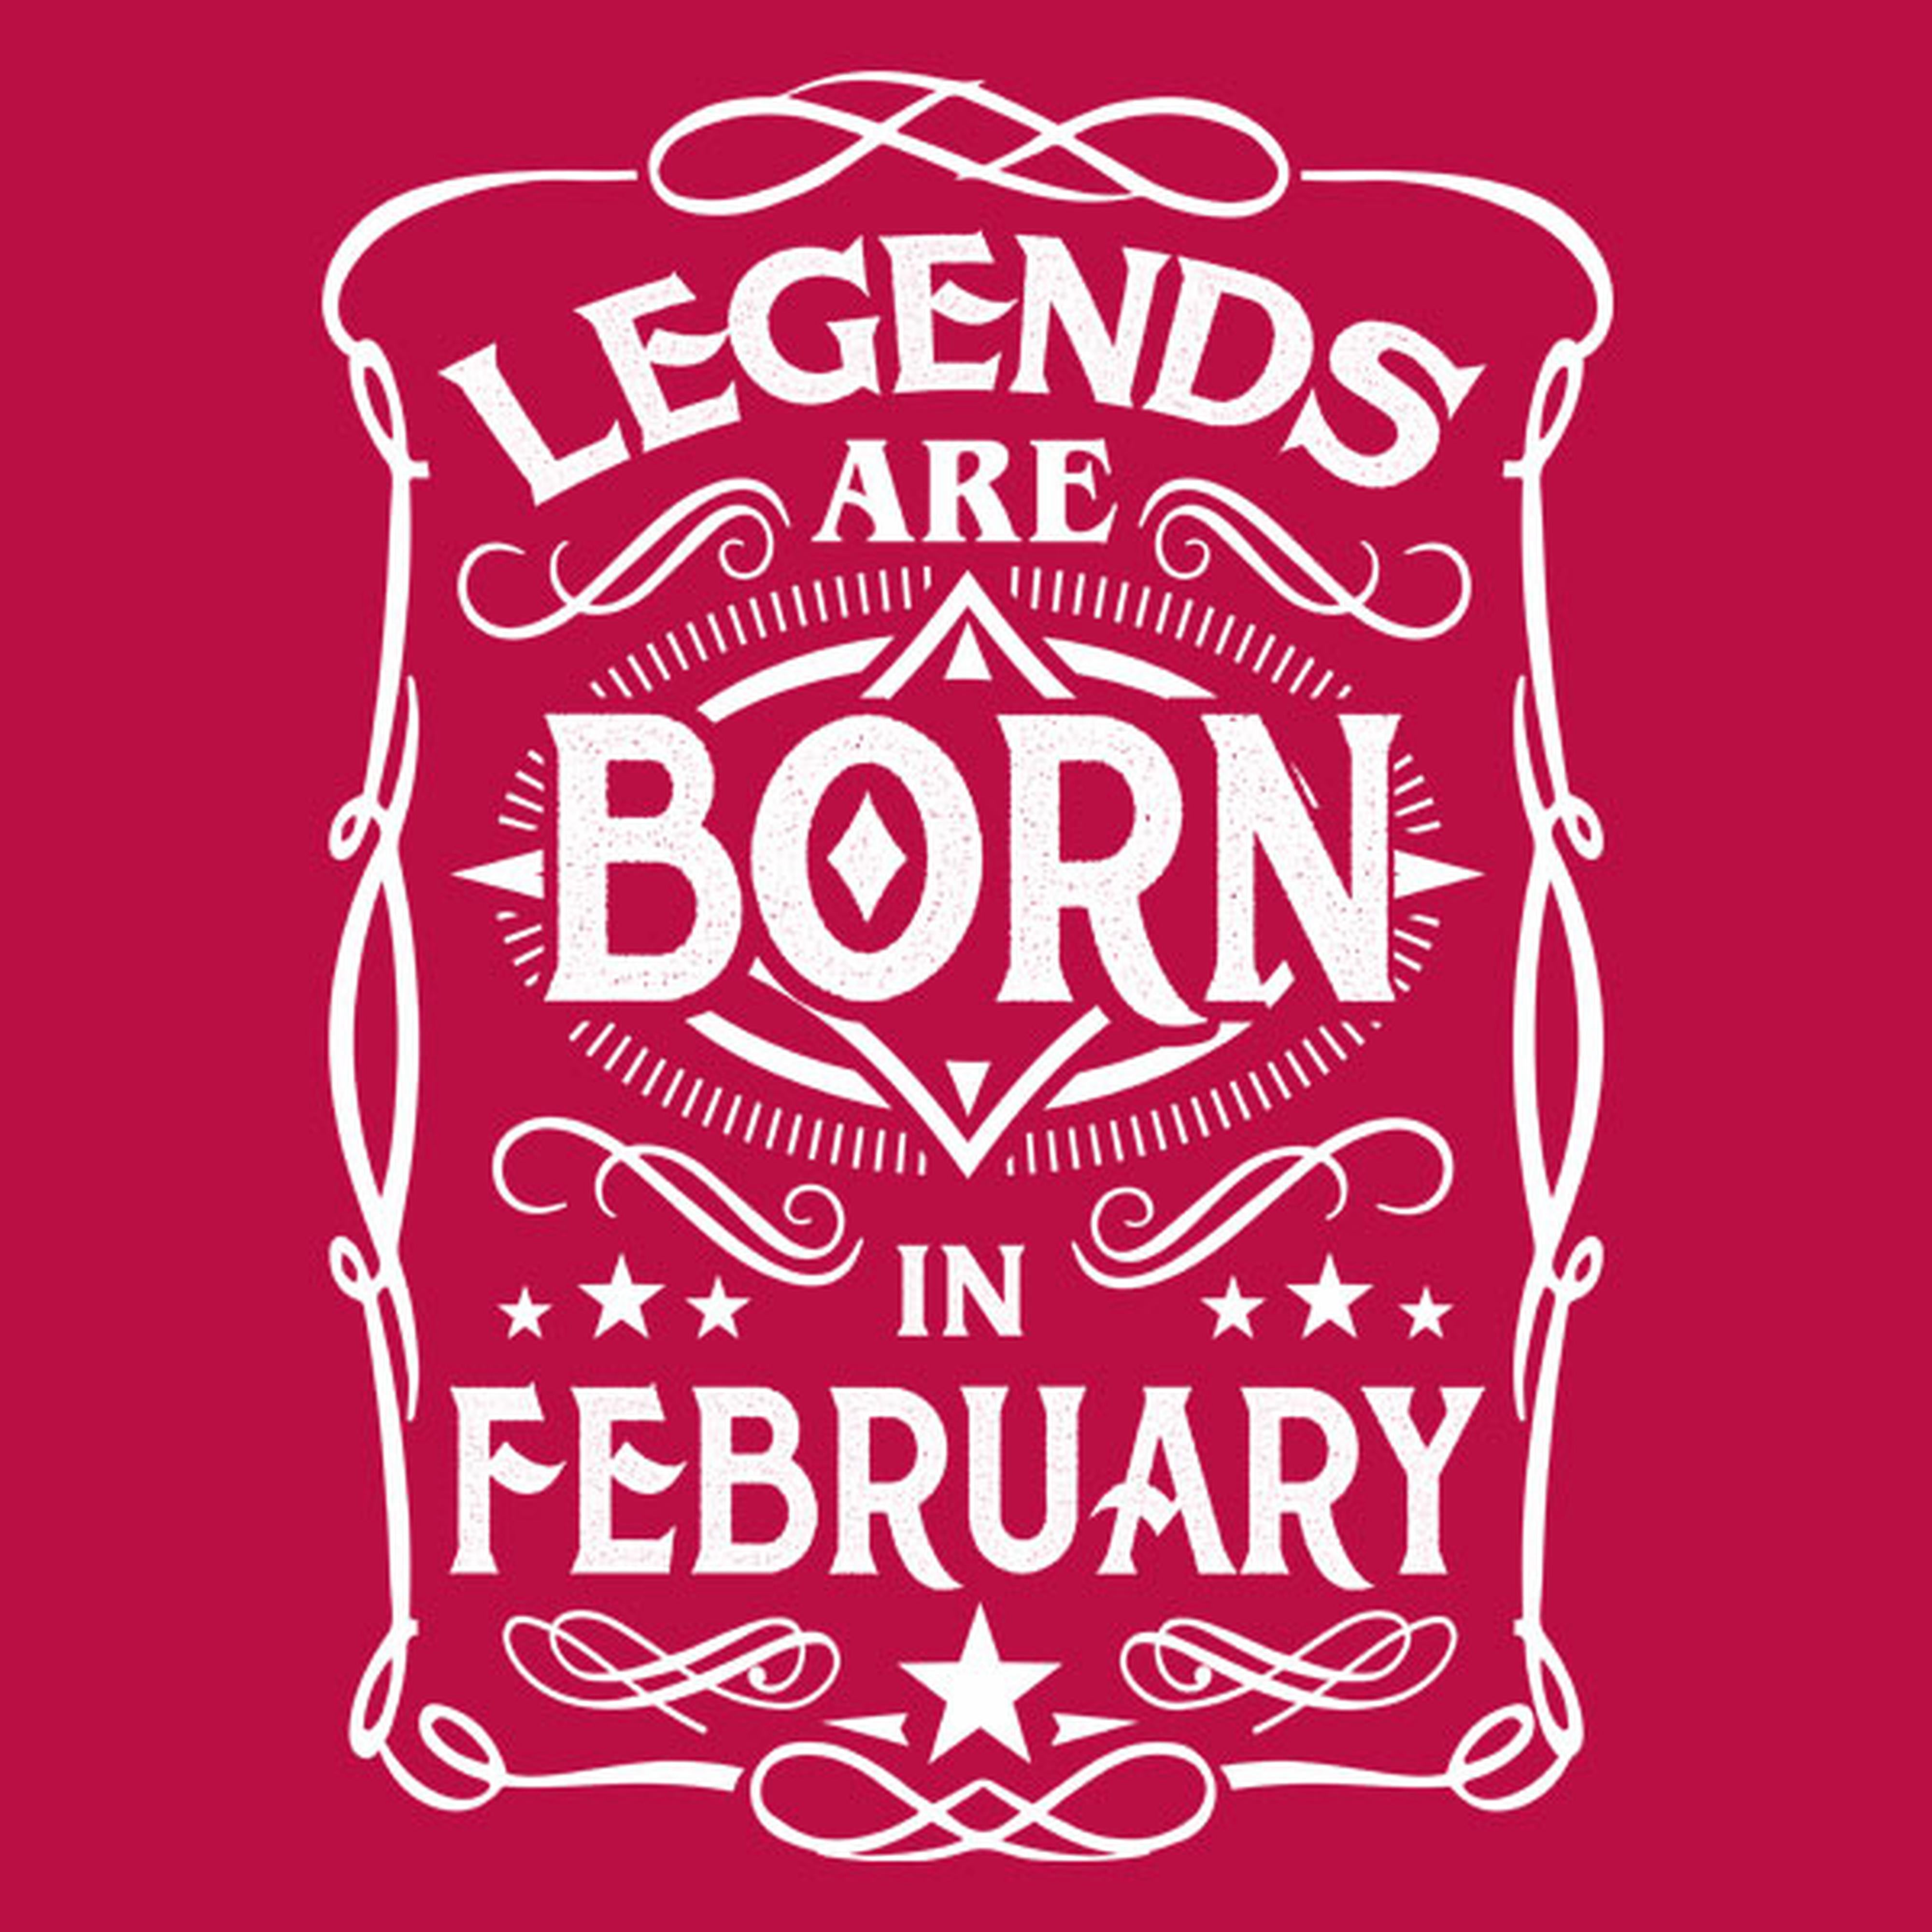 Legends are born in February - T-shirt